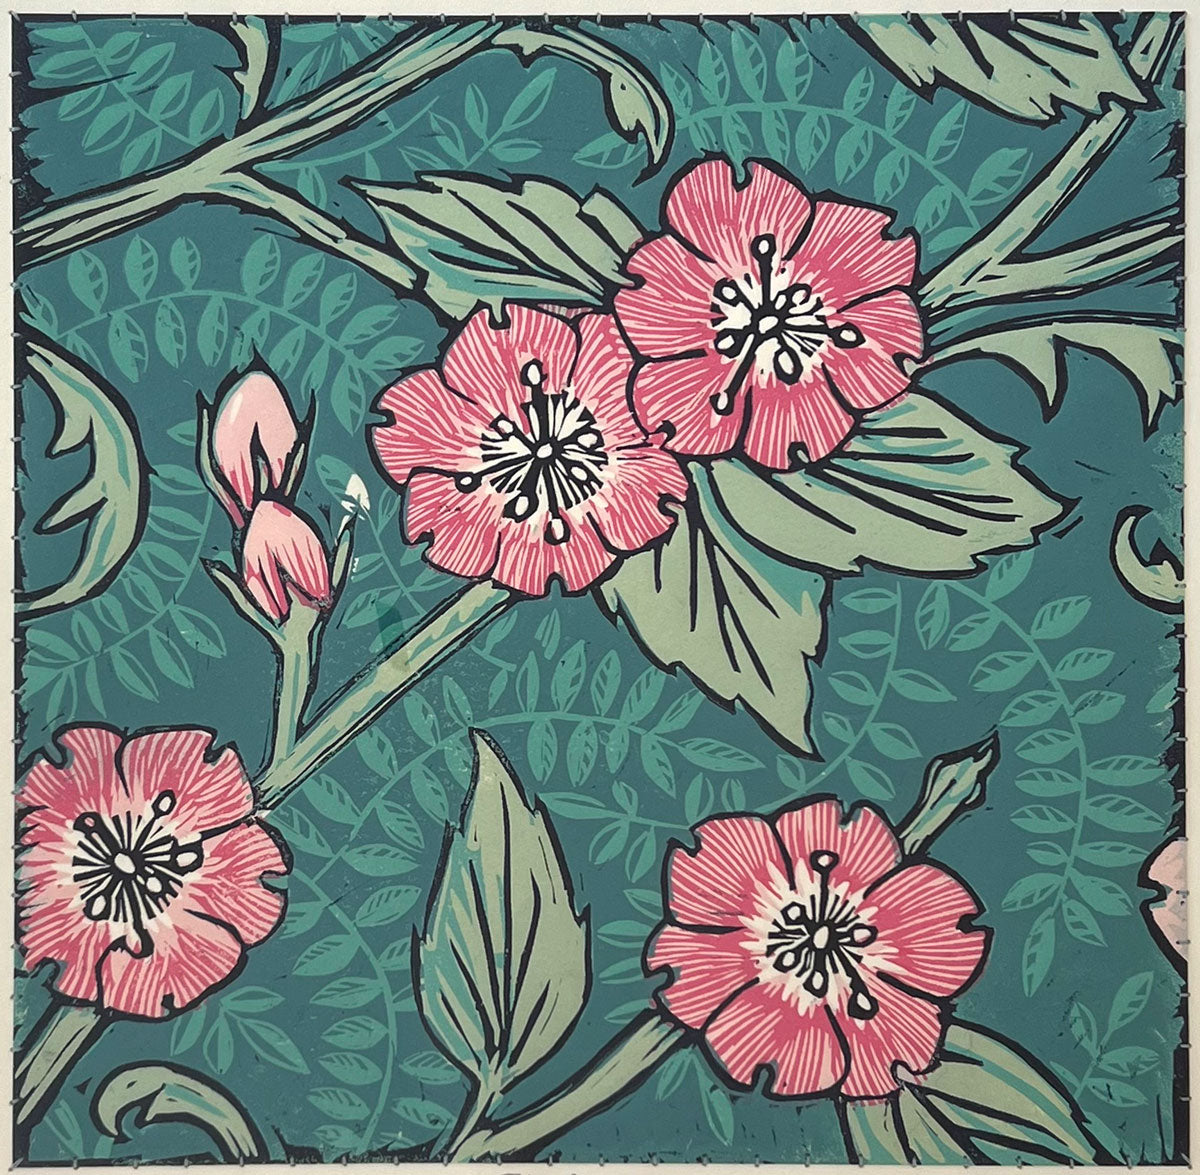 208. Teal with Flowers (unframed)